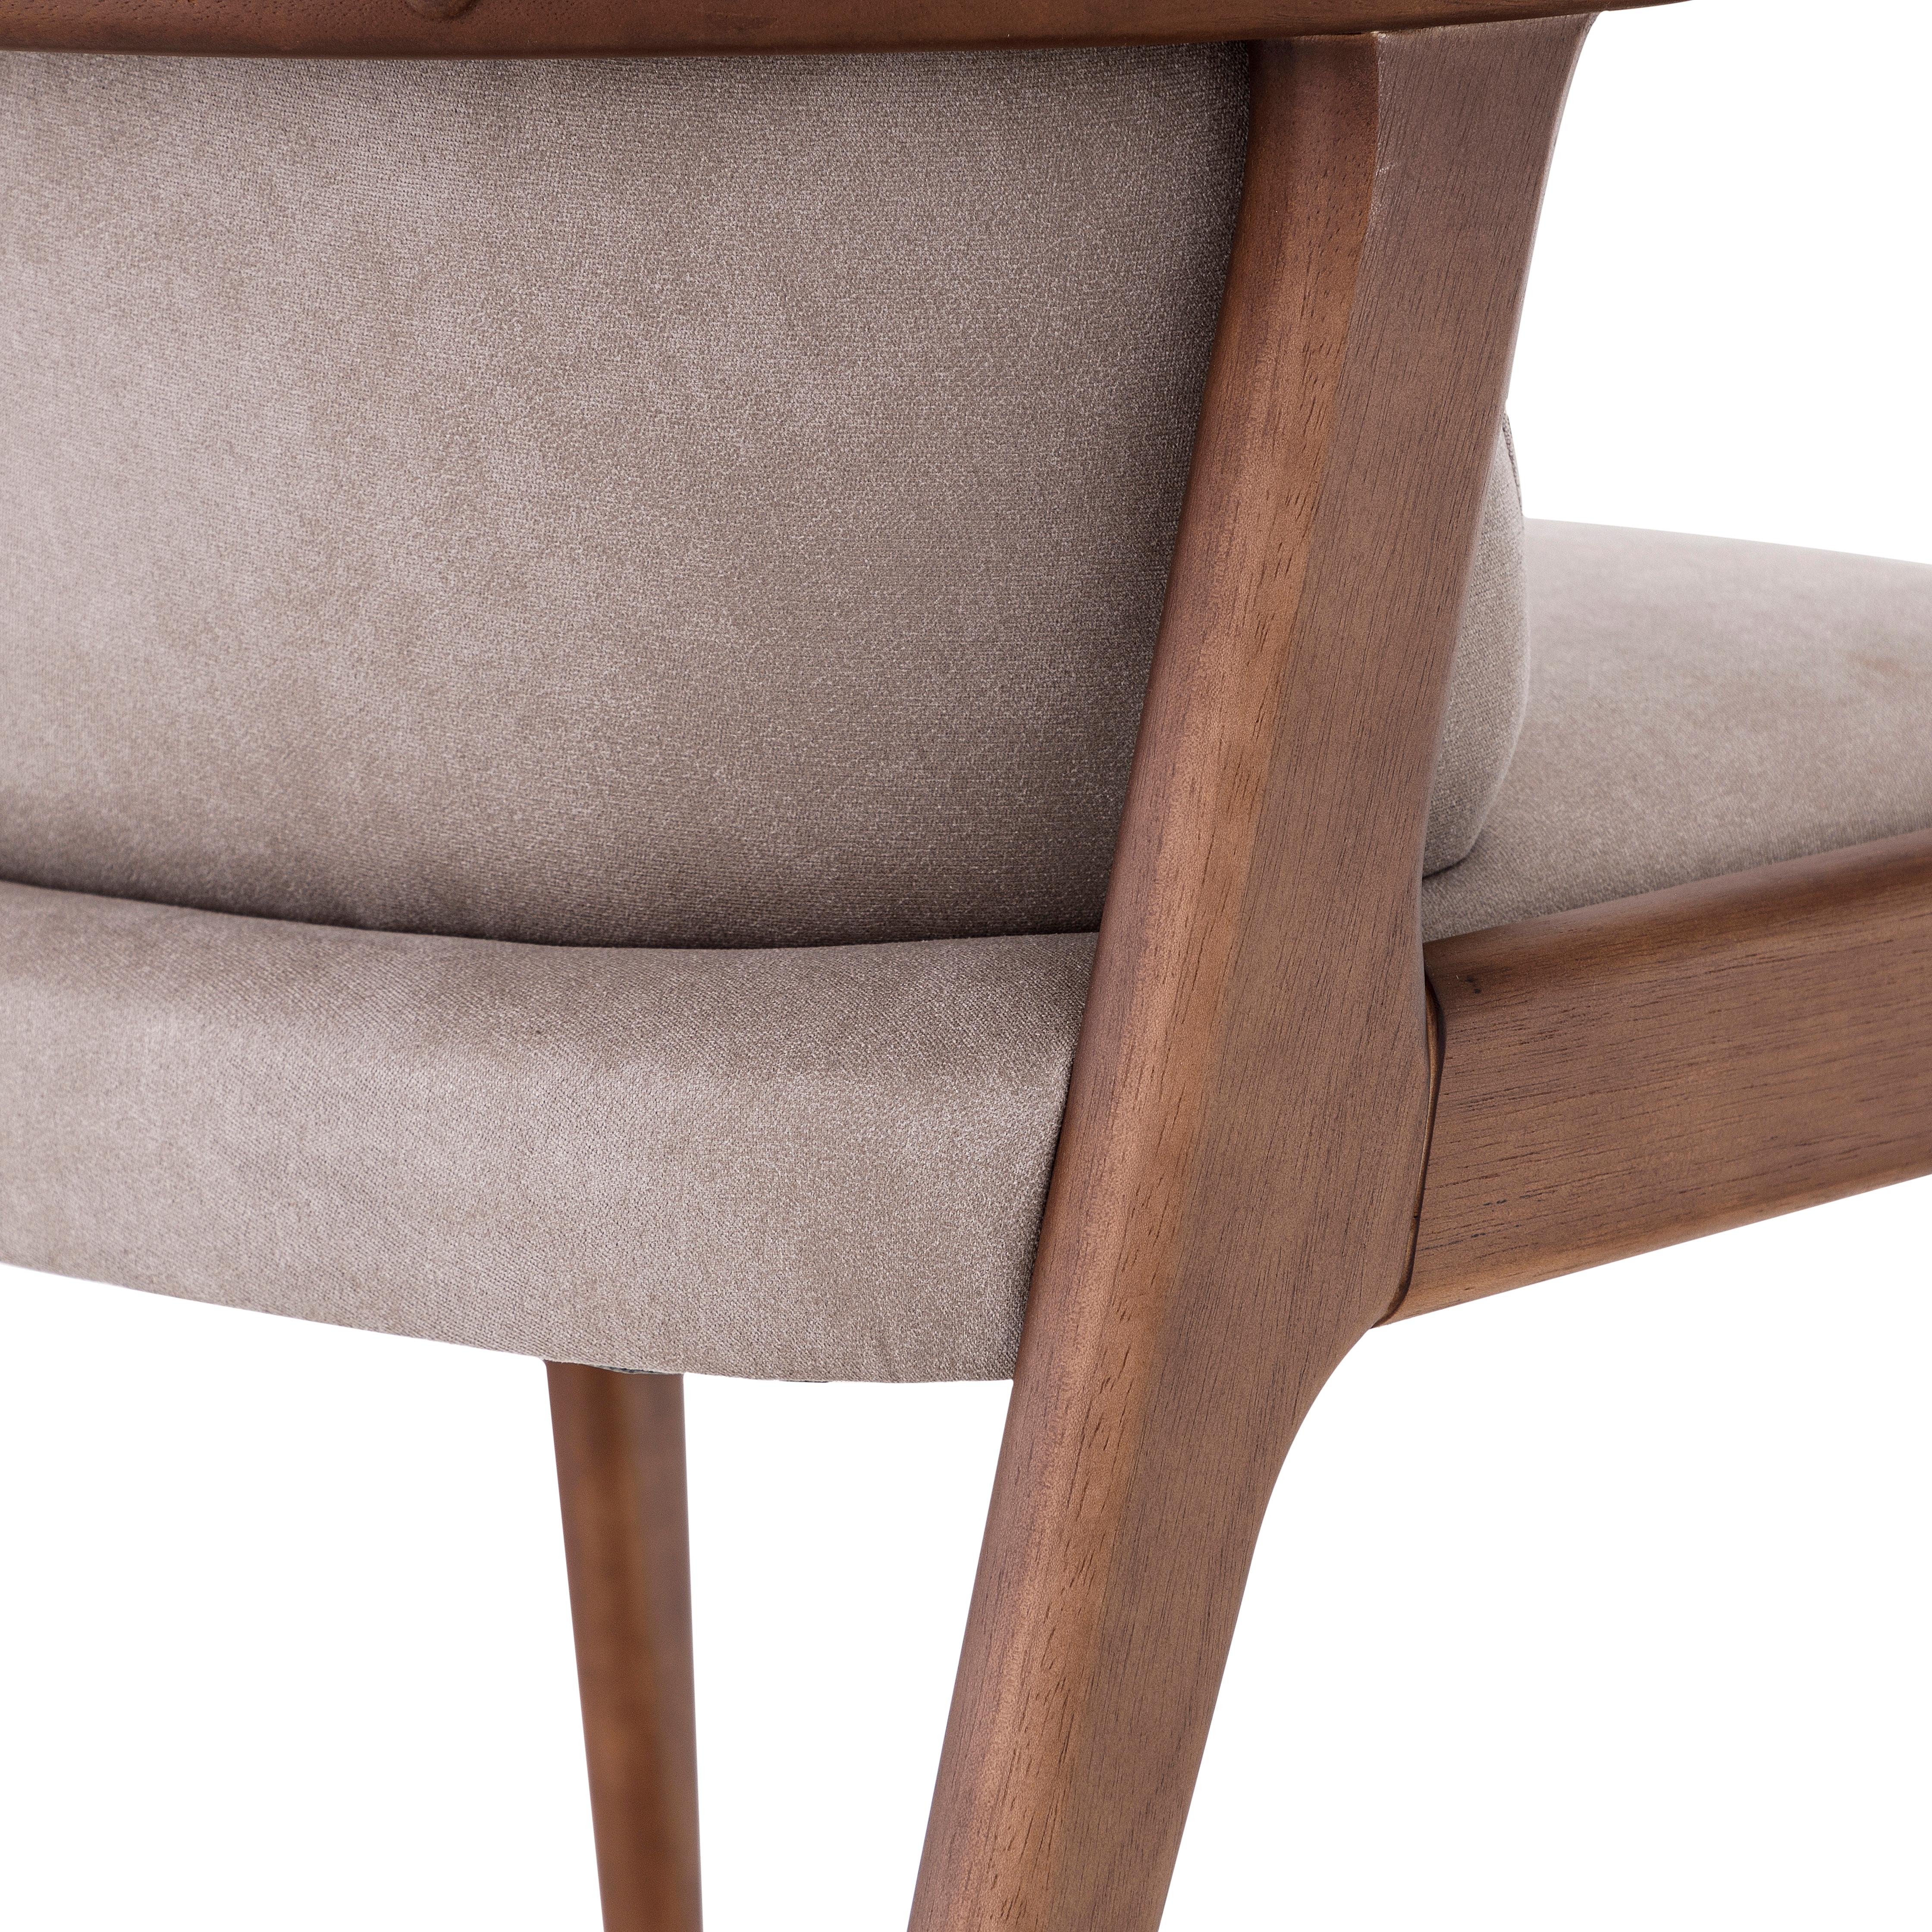 Brazilian Nowe Dining Chair in Walnut Wood Finish and Light Brown Cotton Fabric For Sale